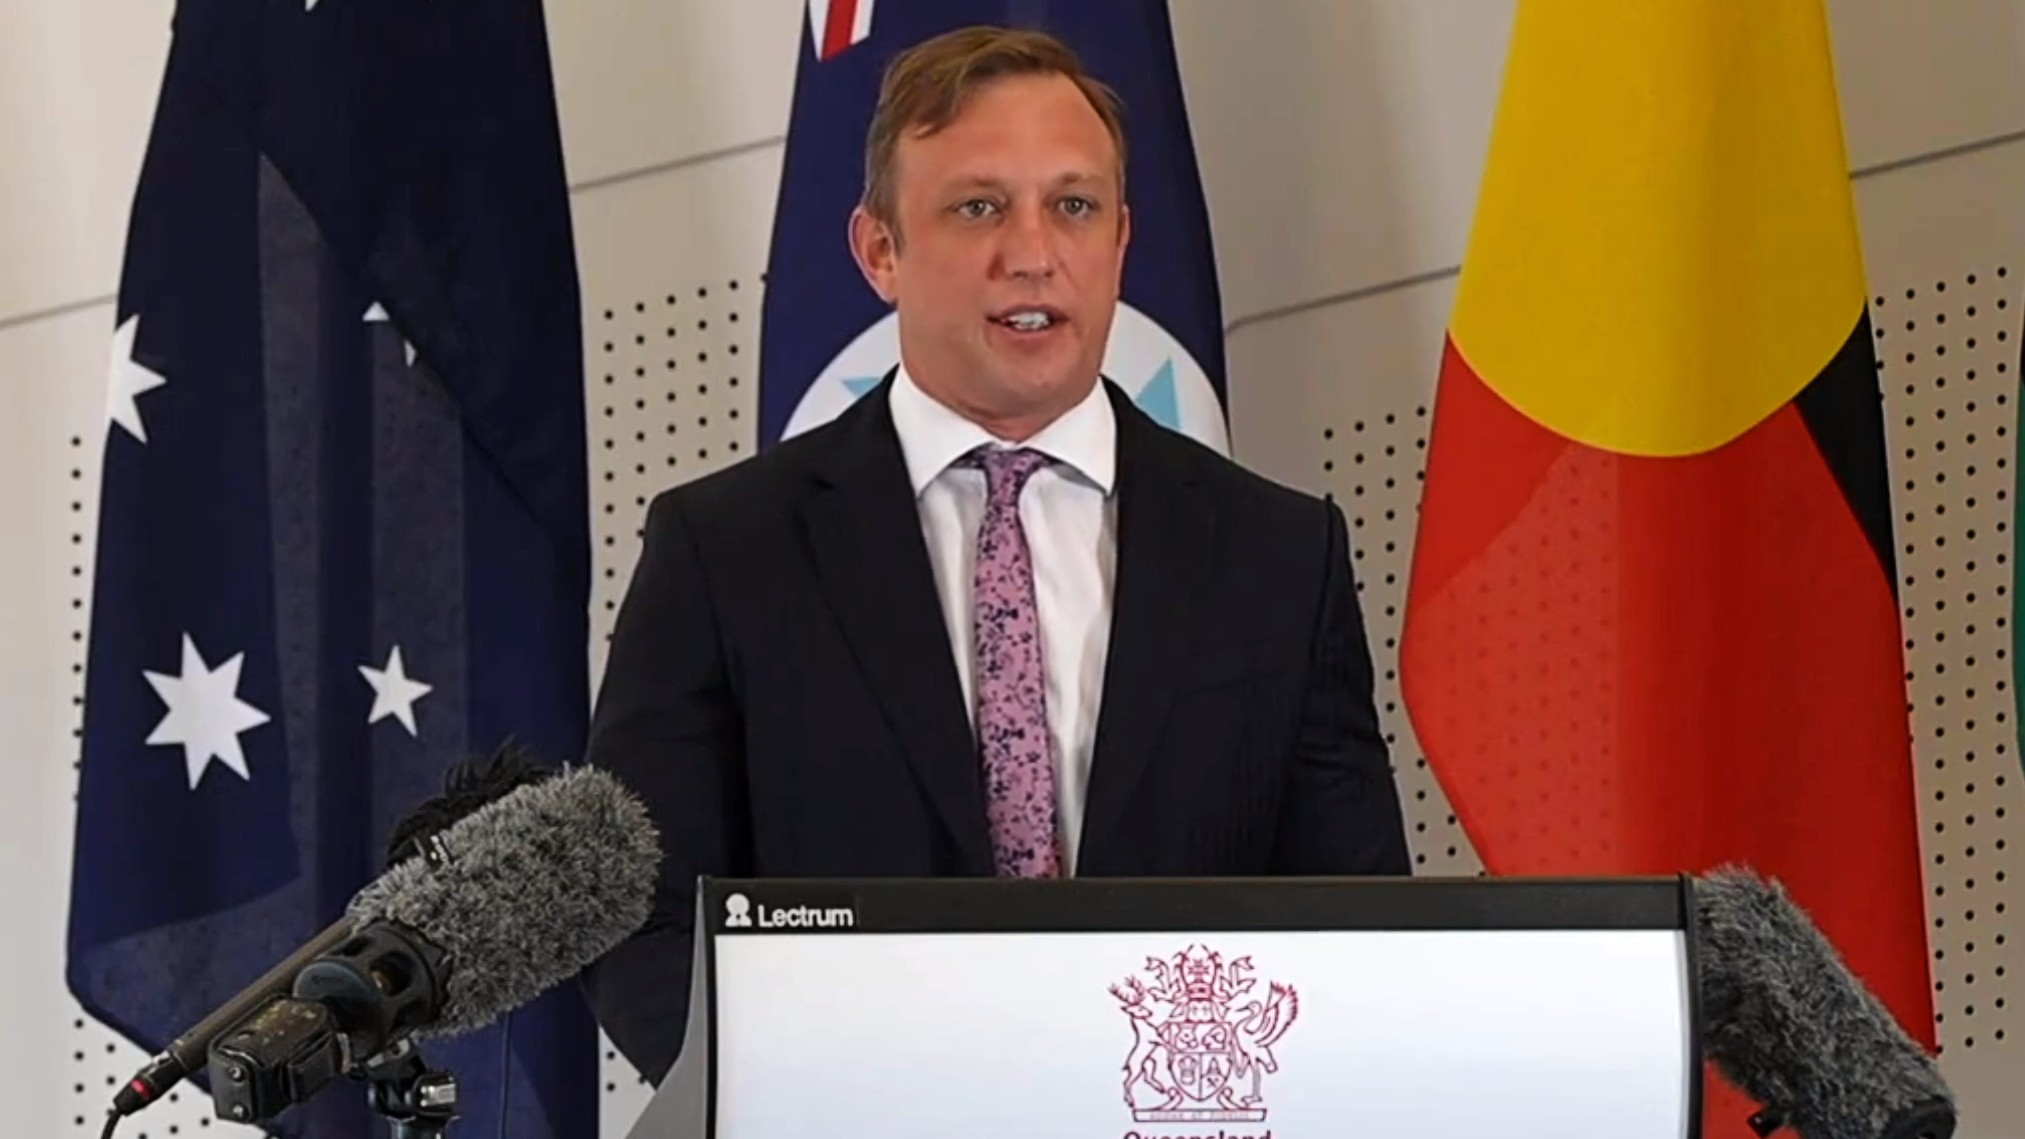 Queensland Deputy Premier Steven Miles earlier said that the site was needed "as soon as possible" and again urged the Federal Government to expand its scope towards other facilities in the state's west.